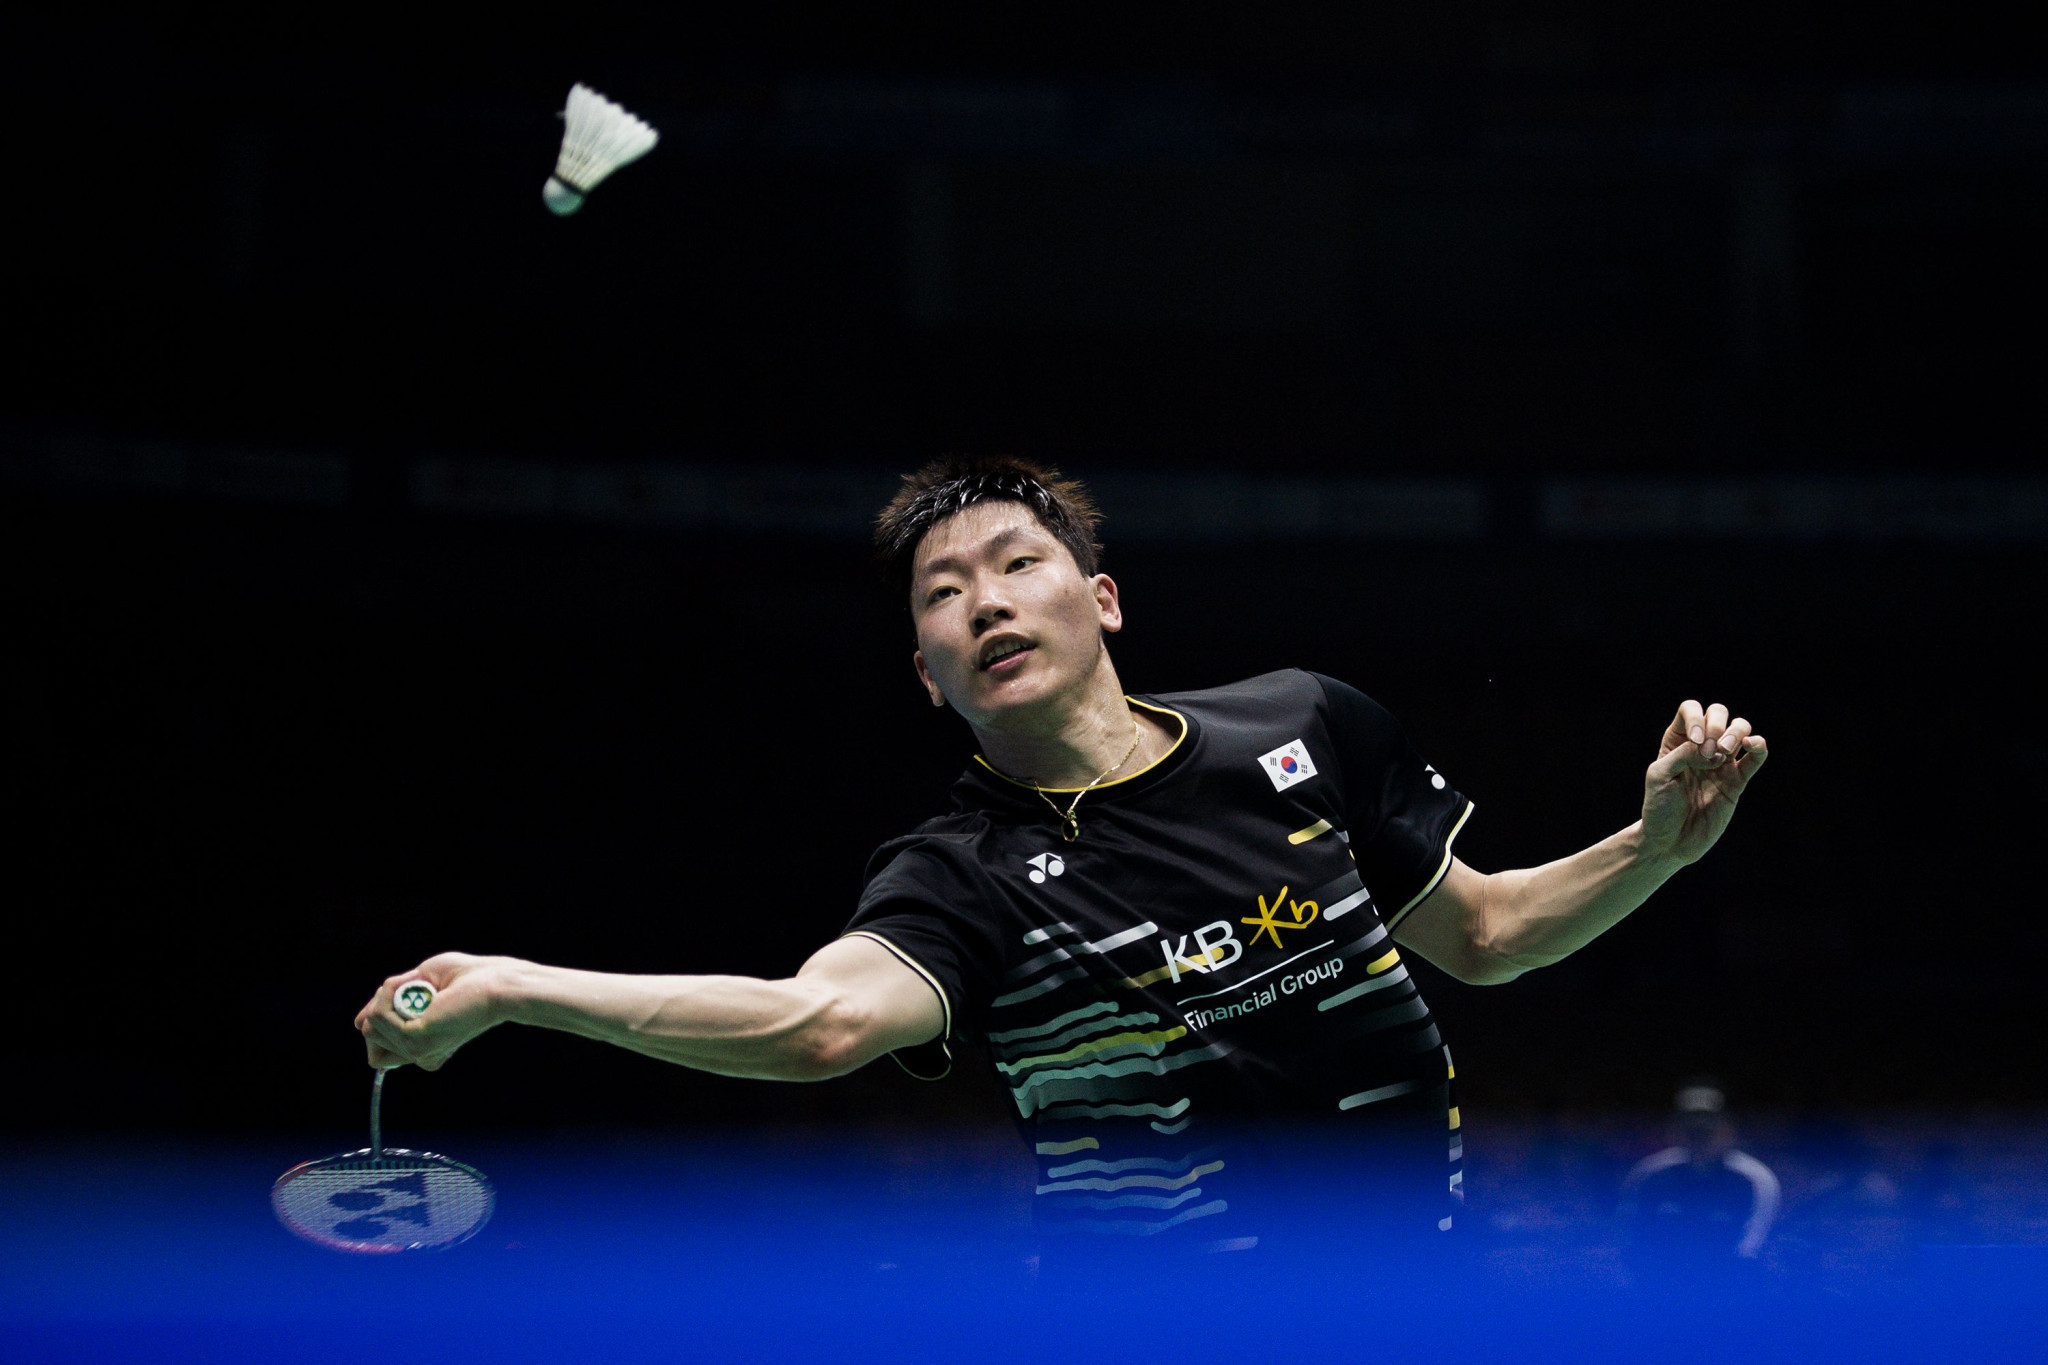 Lee Dong-keun is hoping for tournament success at the Canada Open ©Getty Images